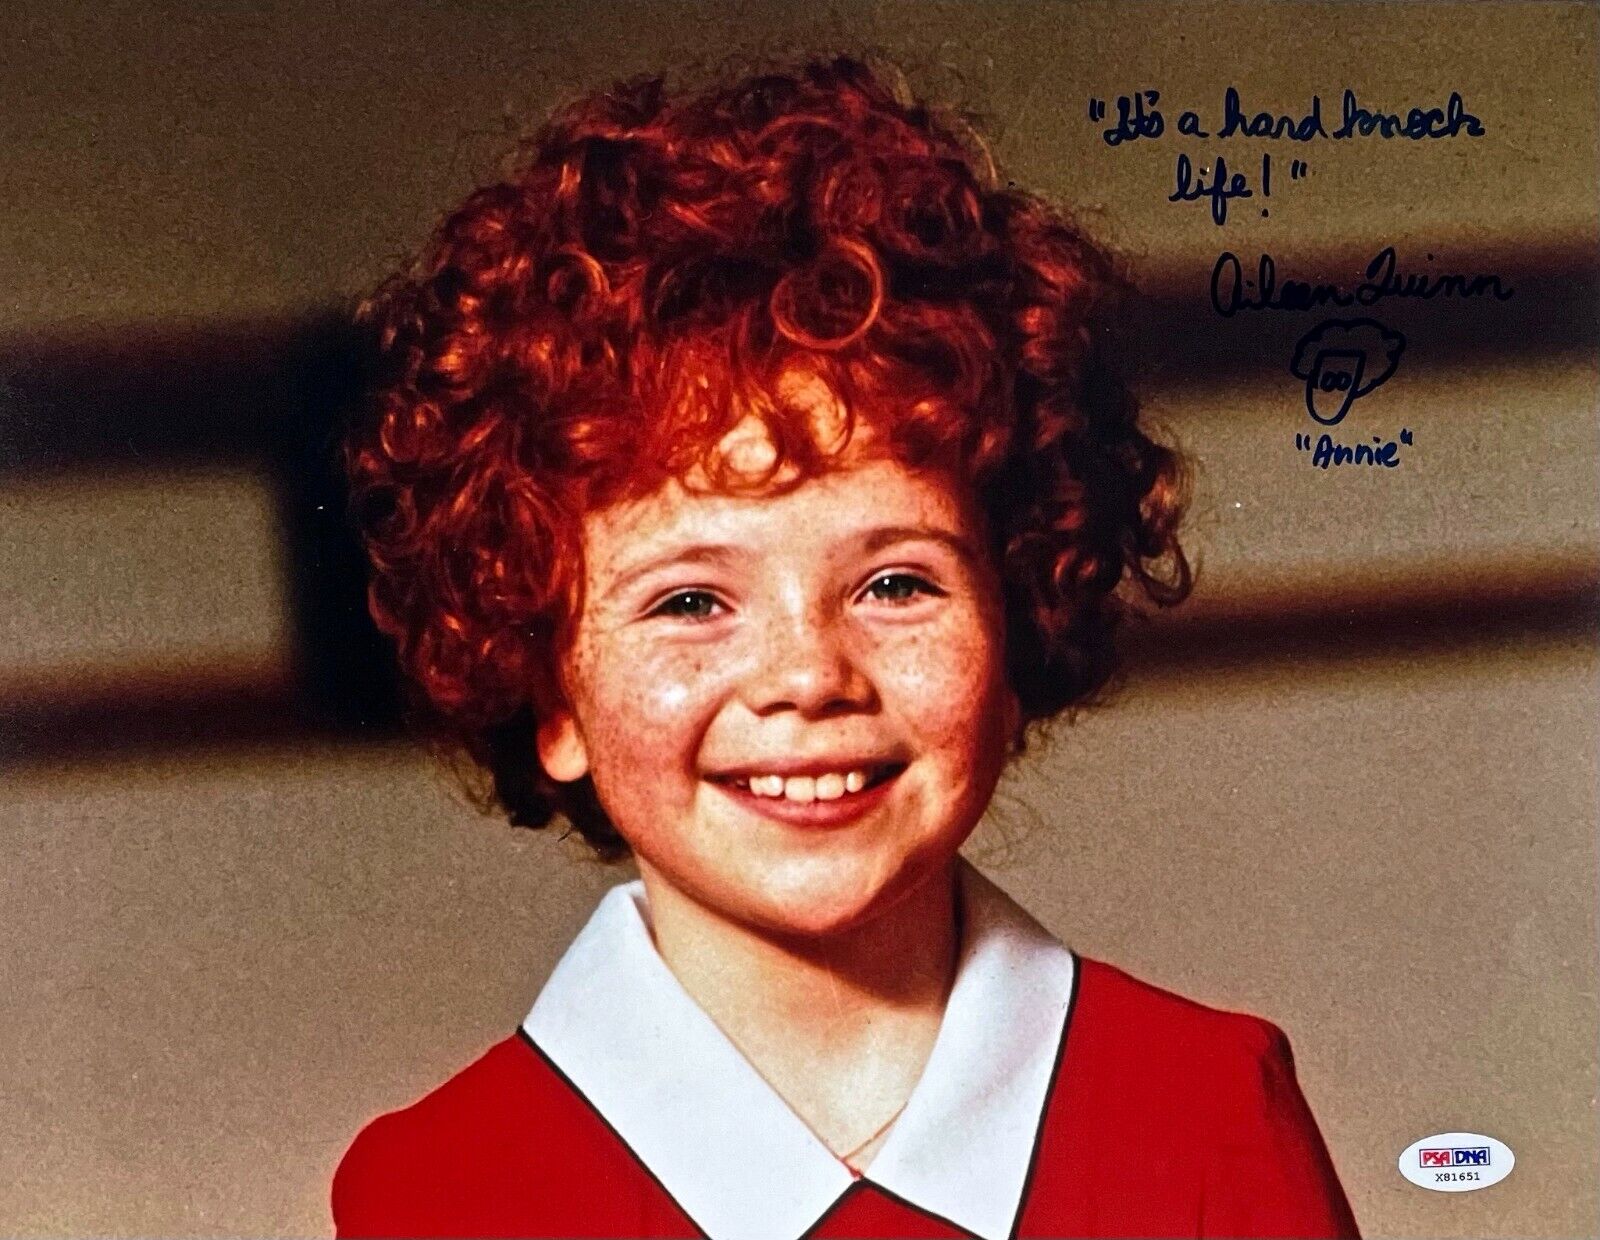 AILEEN QUINN Autograph Hand SIGNED 11x14 Photo Poster painting ANNIE Tomorrow PSA/DNA CERTIFIED